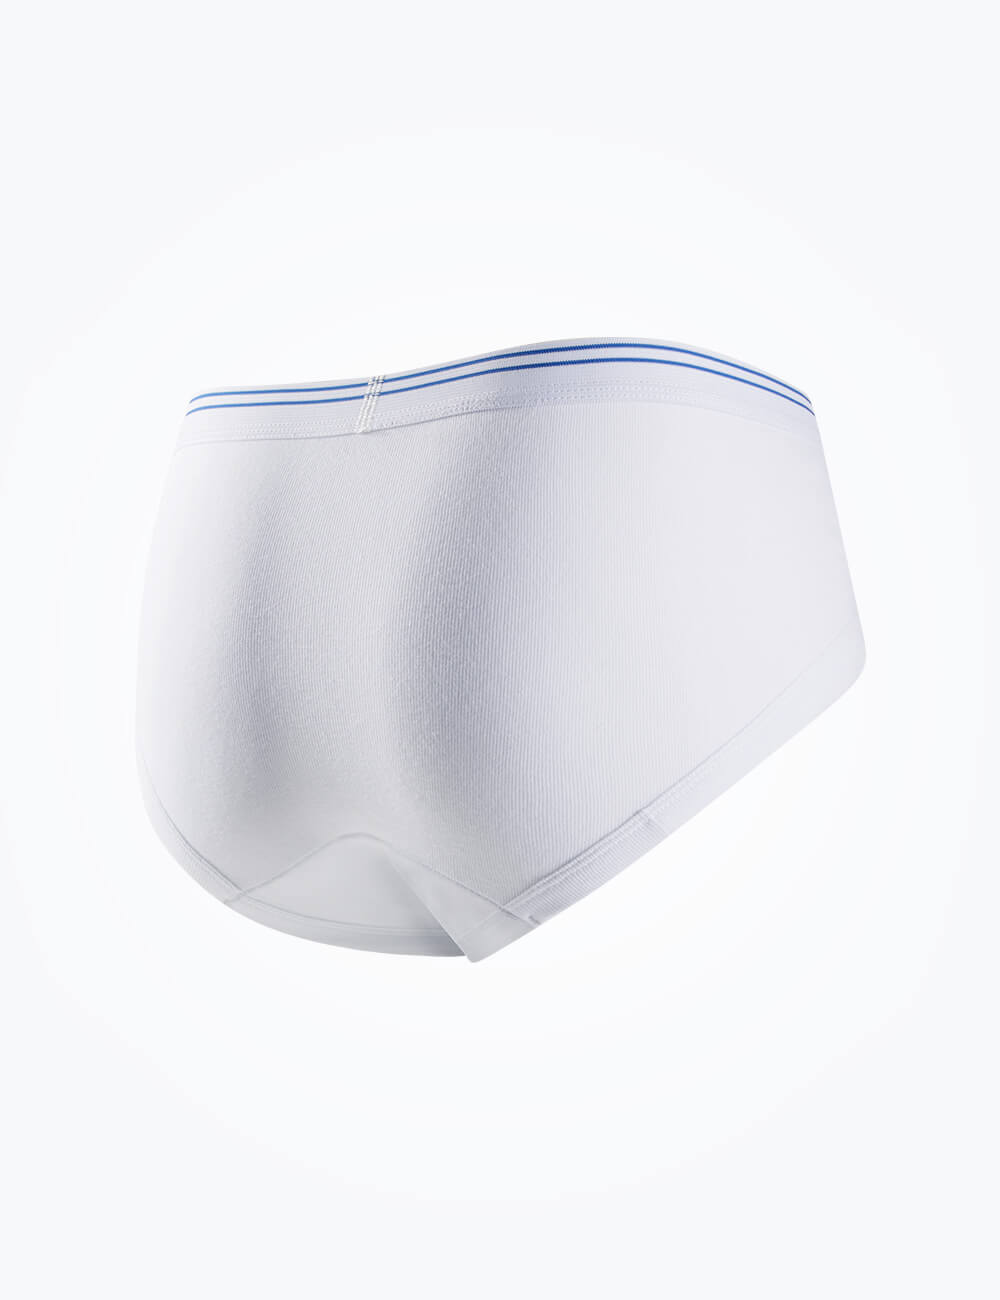 Men's Resuable Waterproof Briefs with Fly for Moderate Incontinence –  CARERSPK